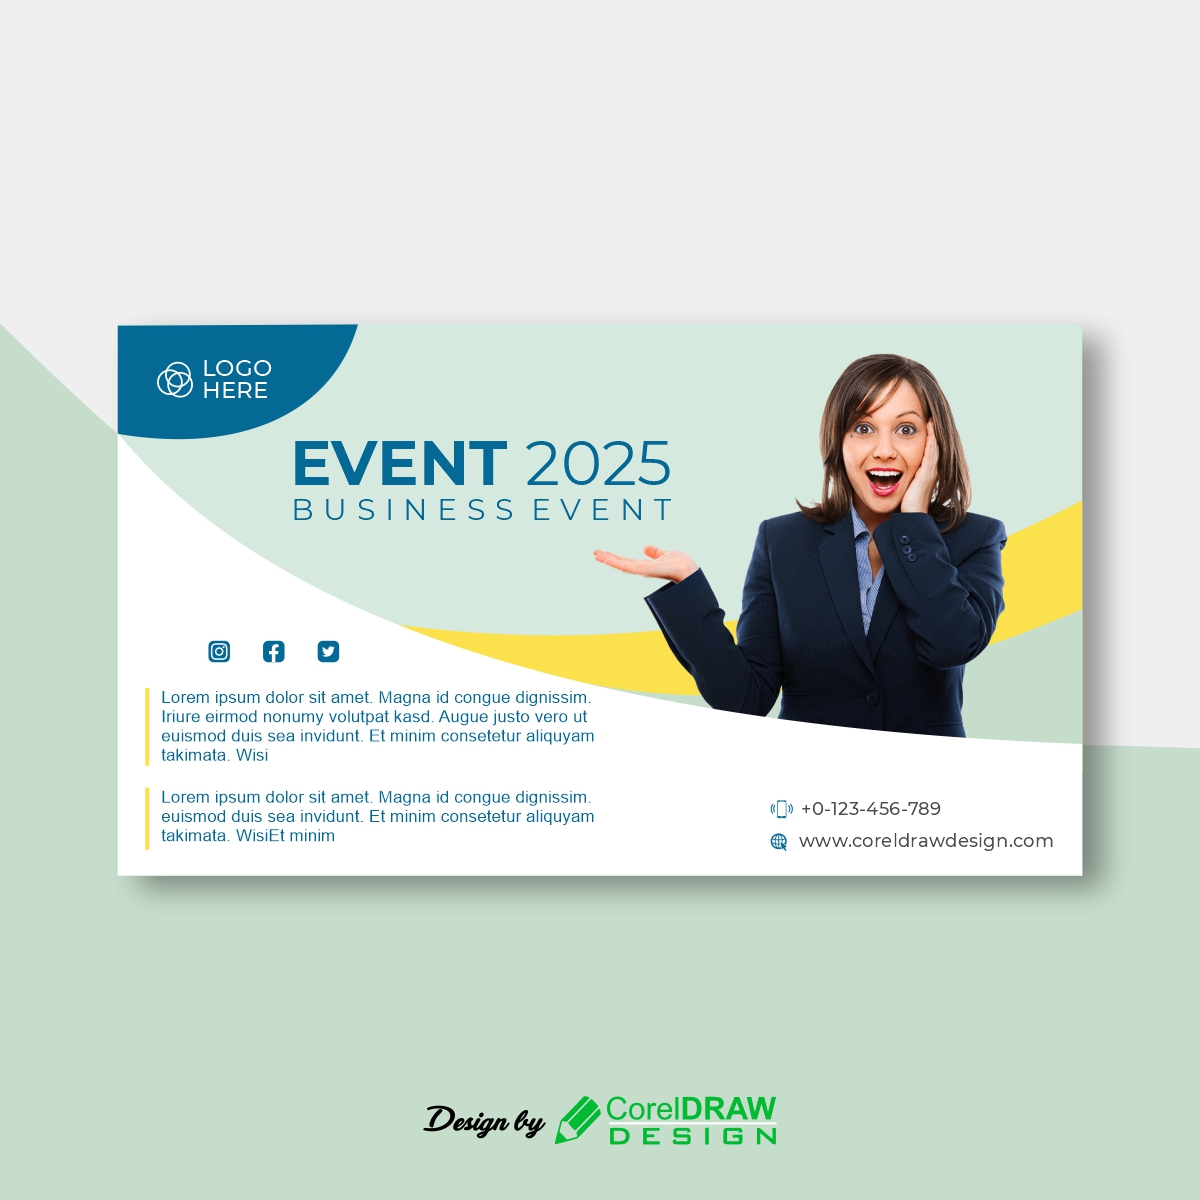 Business Event Banner Concept With Woman Working Free Vector